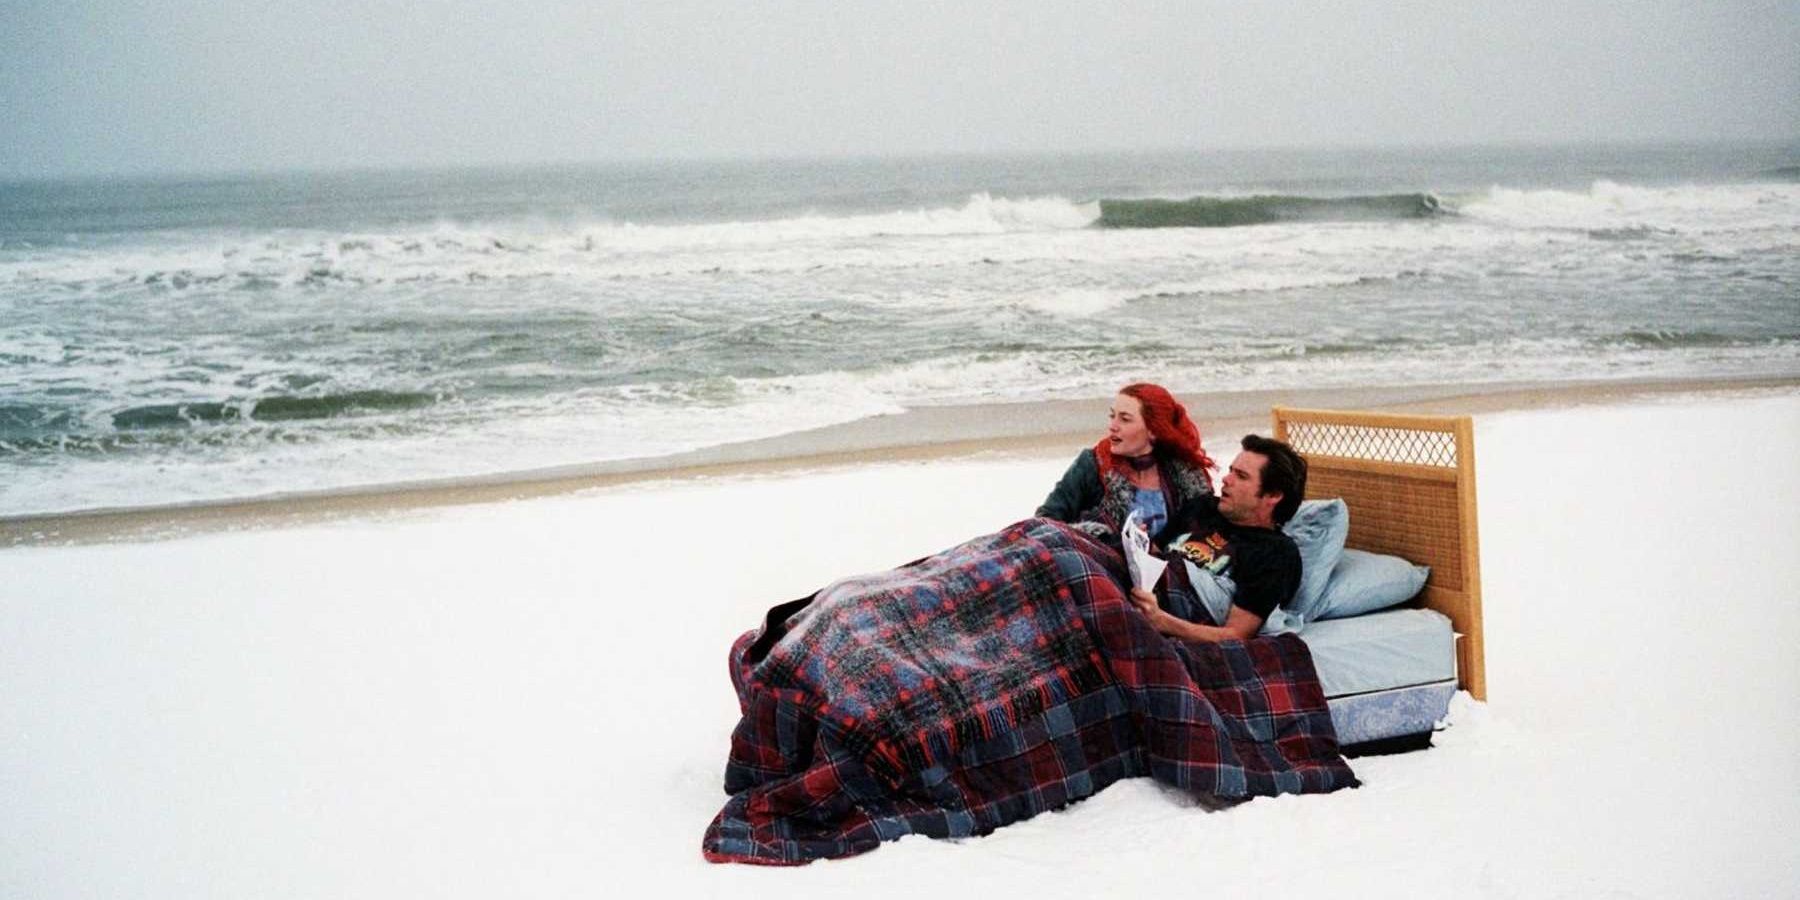 Jim Carrey and Kate Winslet in a bed on a snow-covered beach in Eternal Sunshine of the Spotless Mind.